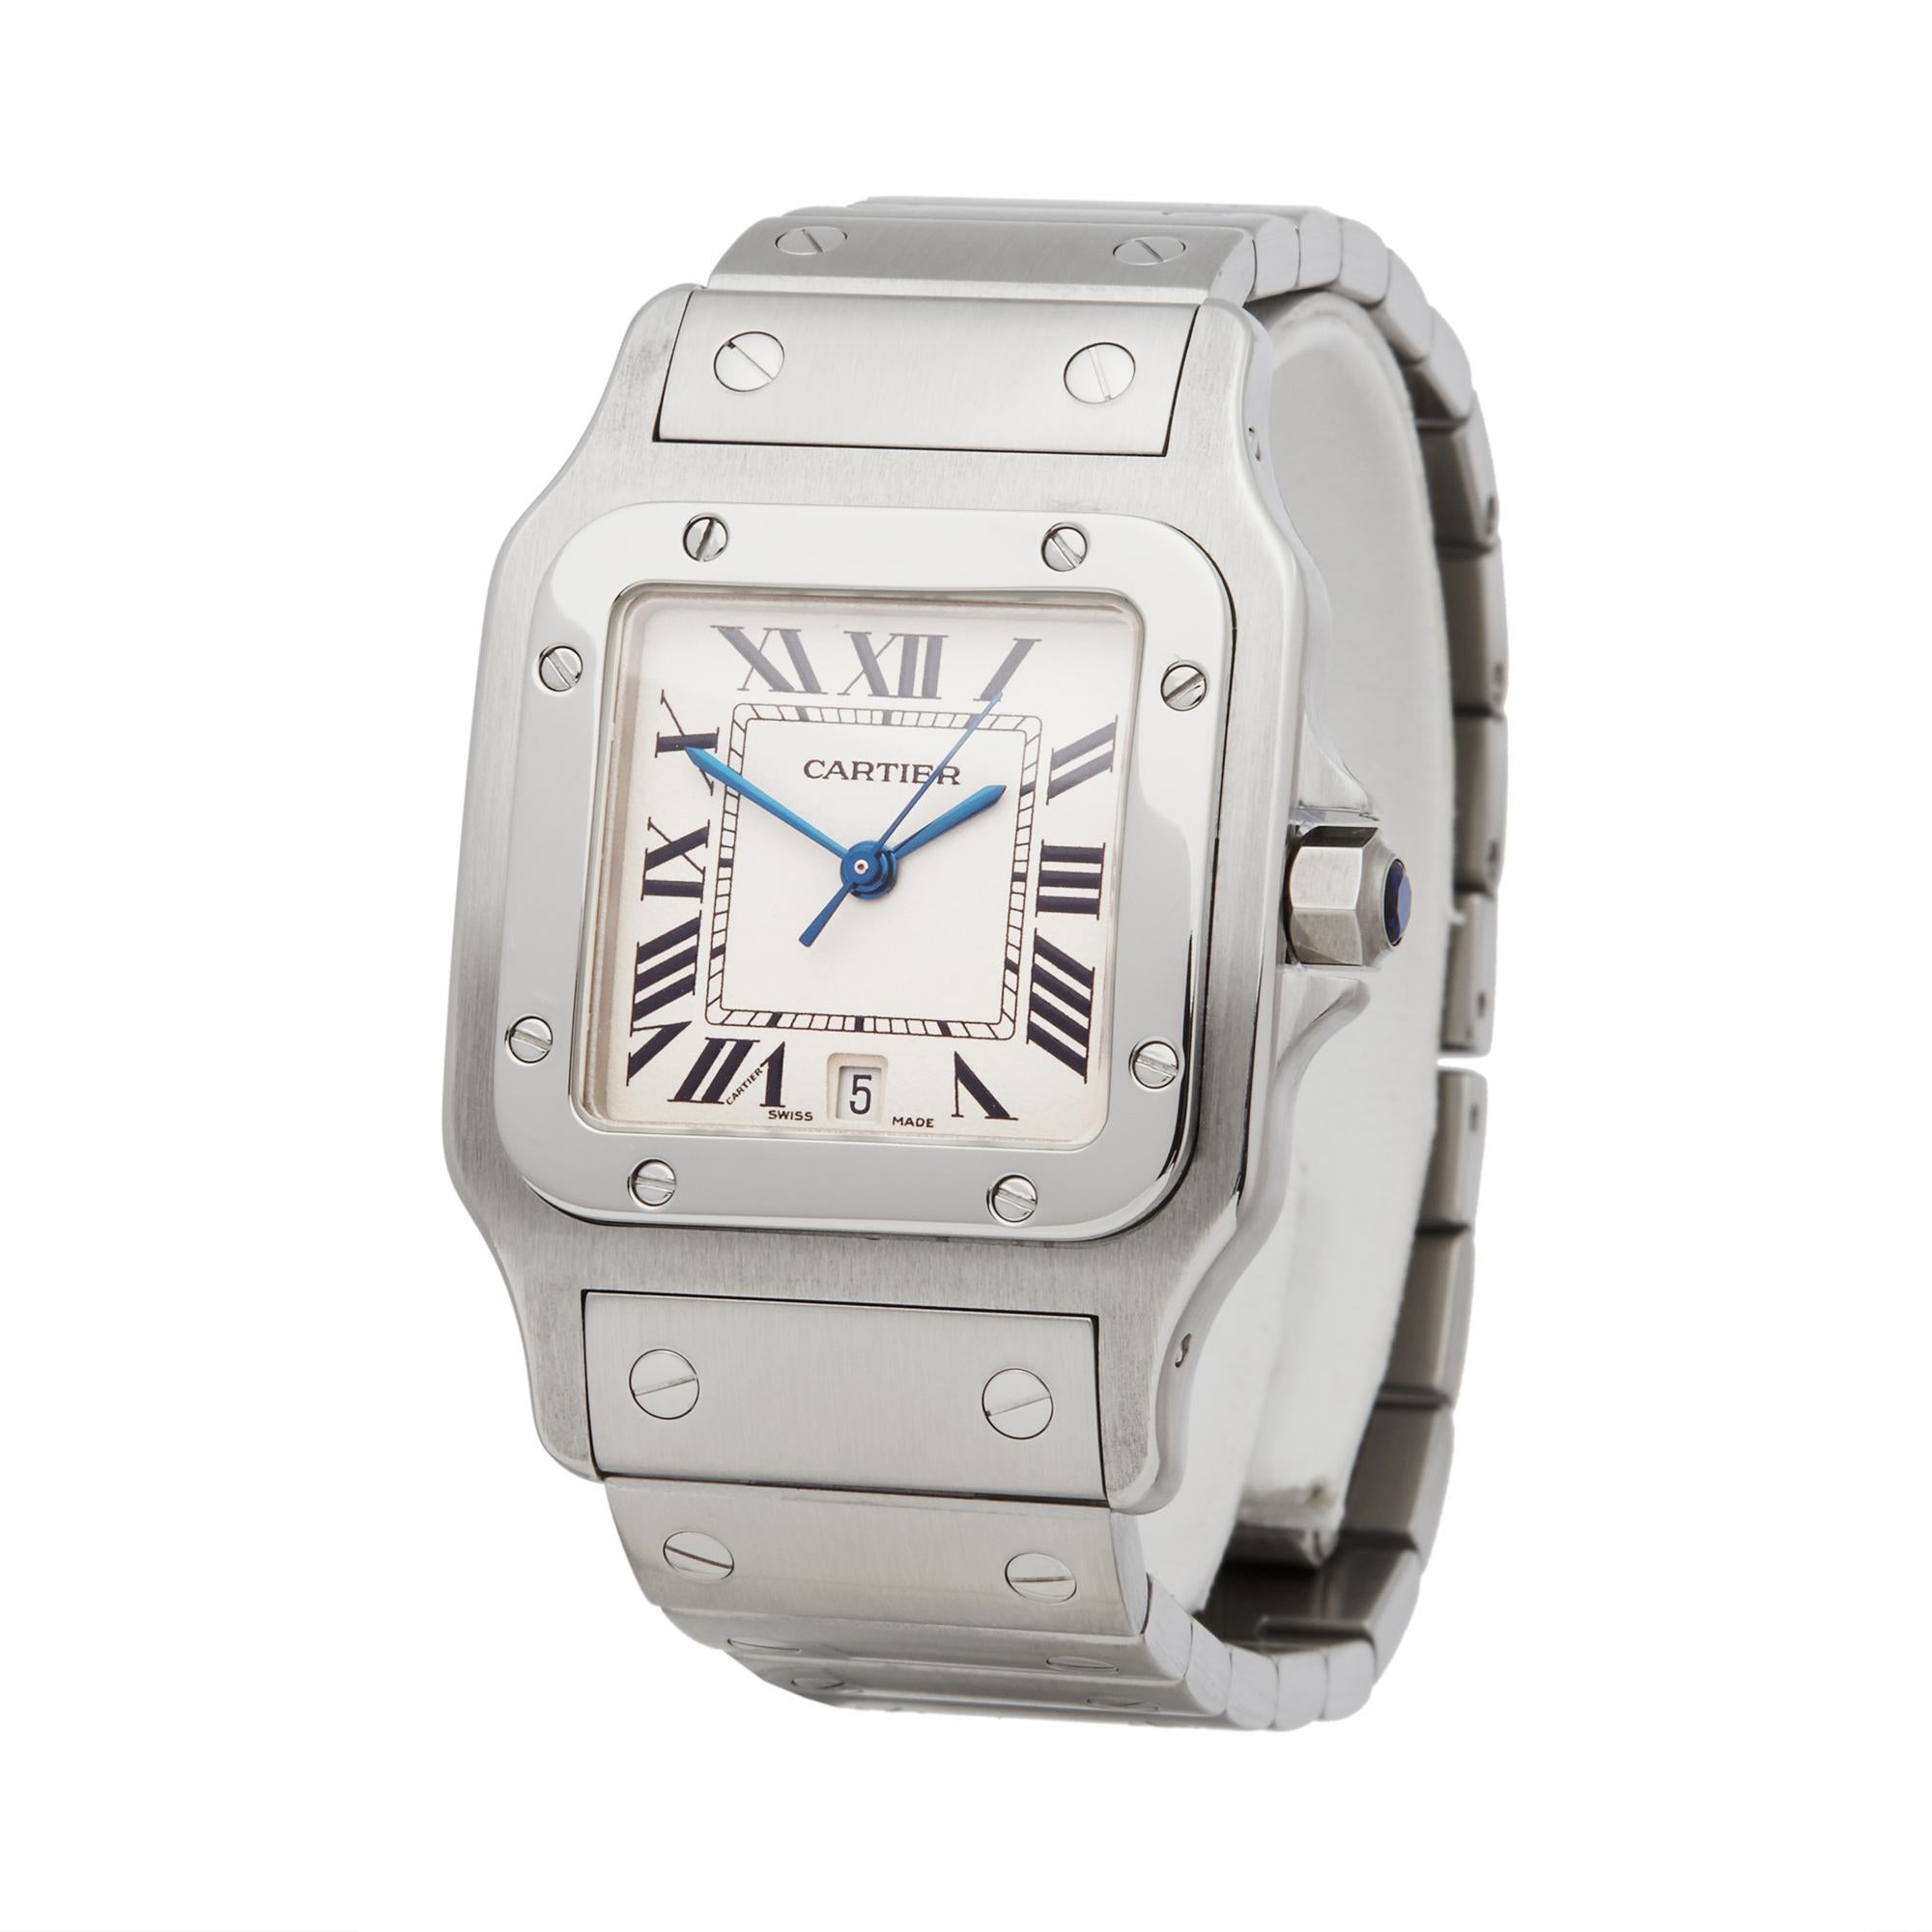 Ref: W5707
Manufacturer: Cartier
Model: Santos Galbee
Model Ref: 1564
Age: Circa 2010's
Gender: Mens
Complete With: Presentation Box
Dial: White Roman 
Glass: Sapphire Crystal
Movement: Quartz
Water Resistance: To Manufacturers Specifications
Case: